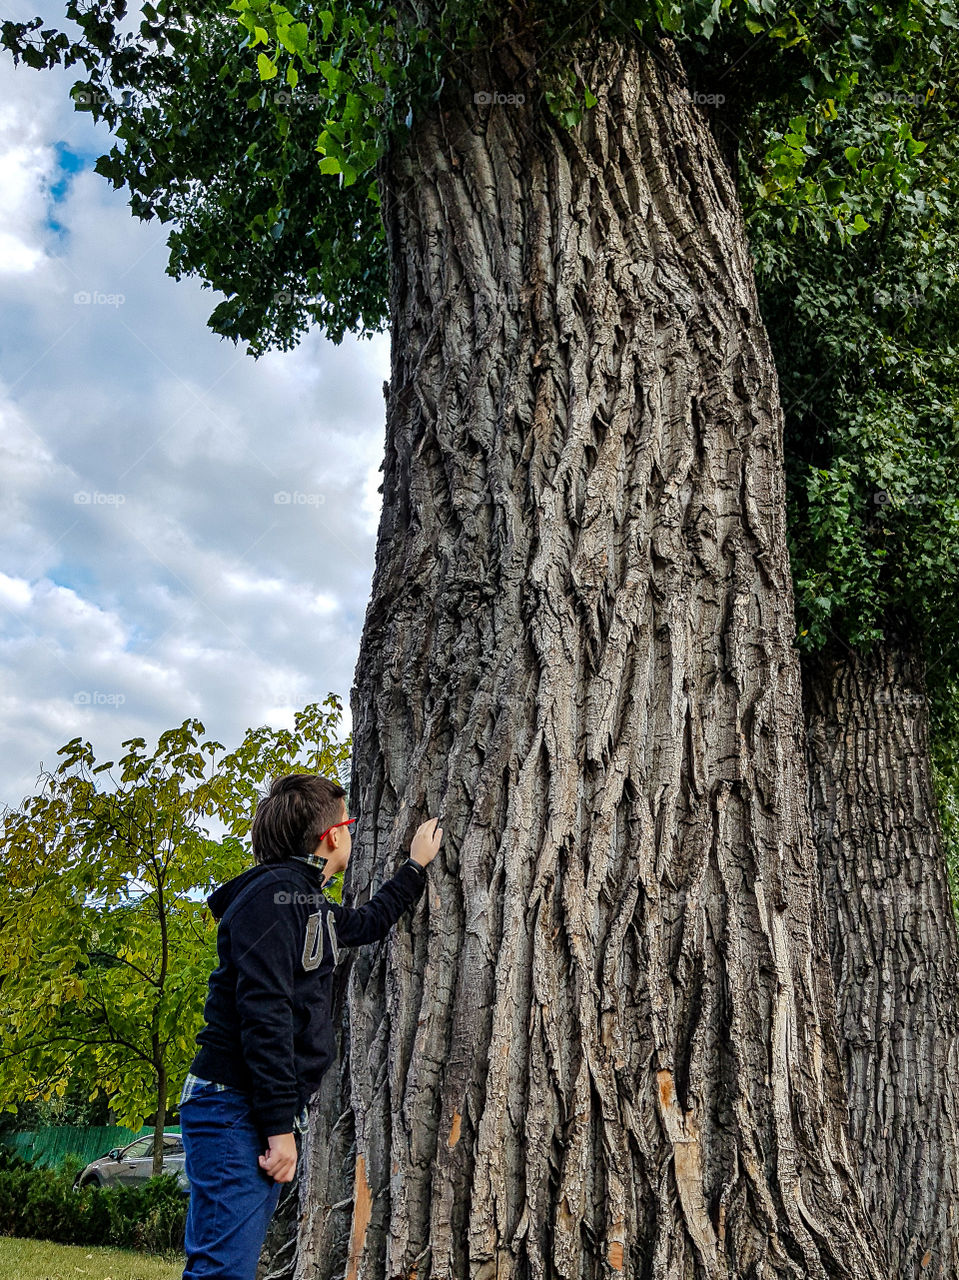 The child next to the huge trunk of a poplar tree looks up at the crown of the tree. The concept of caring for nature.